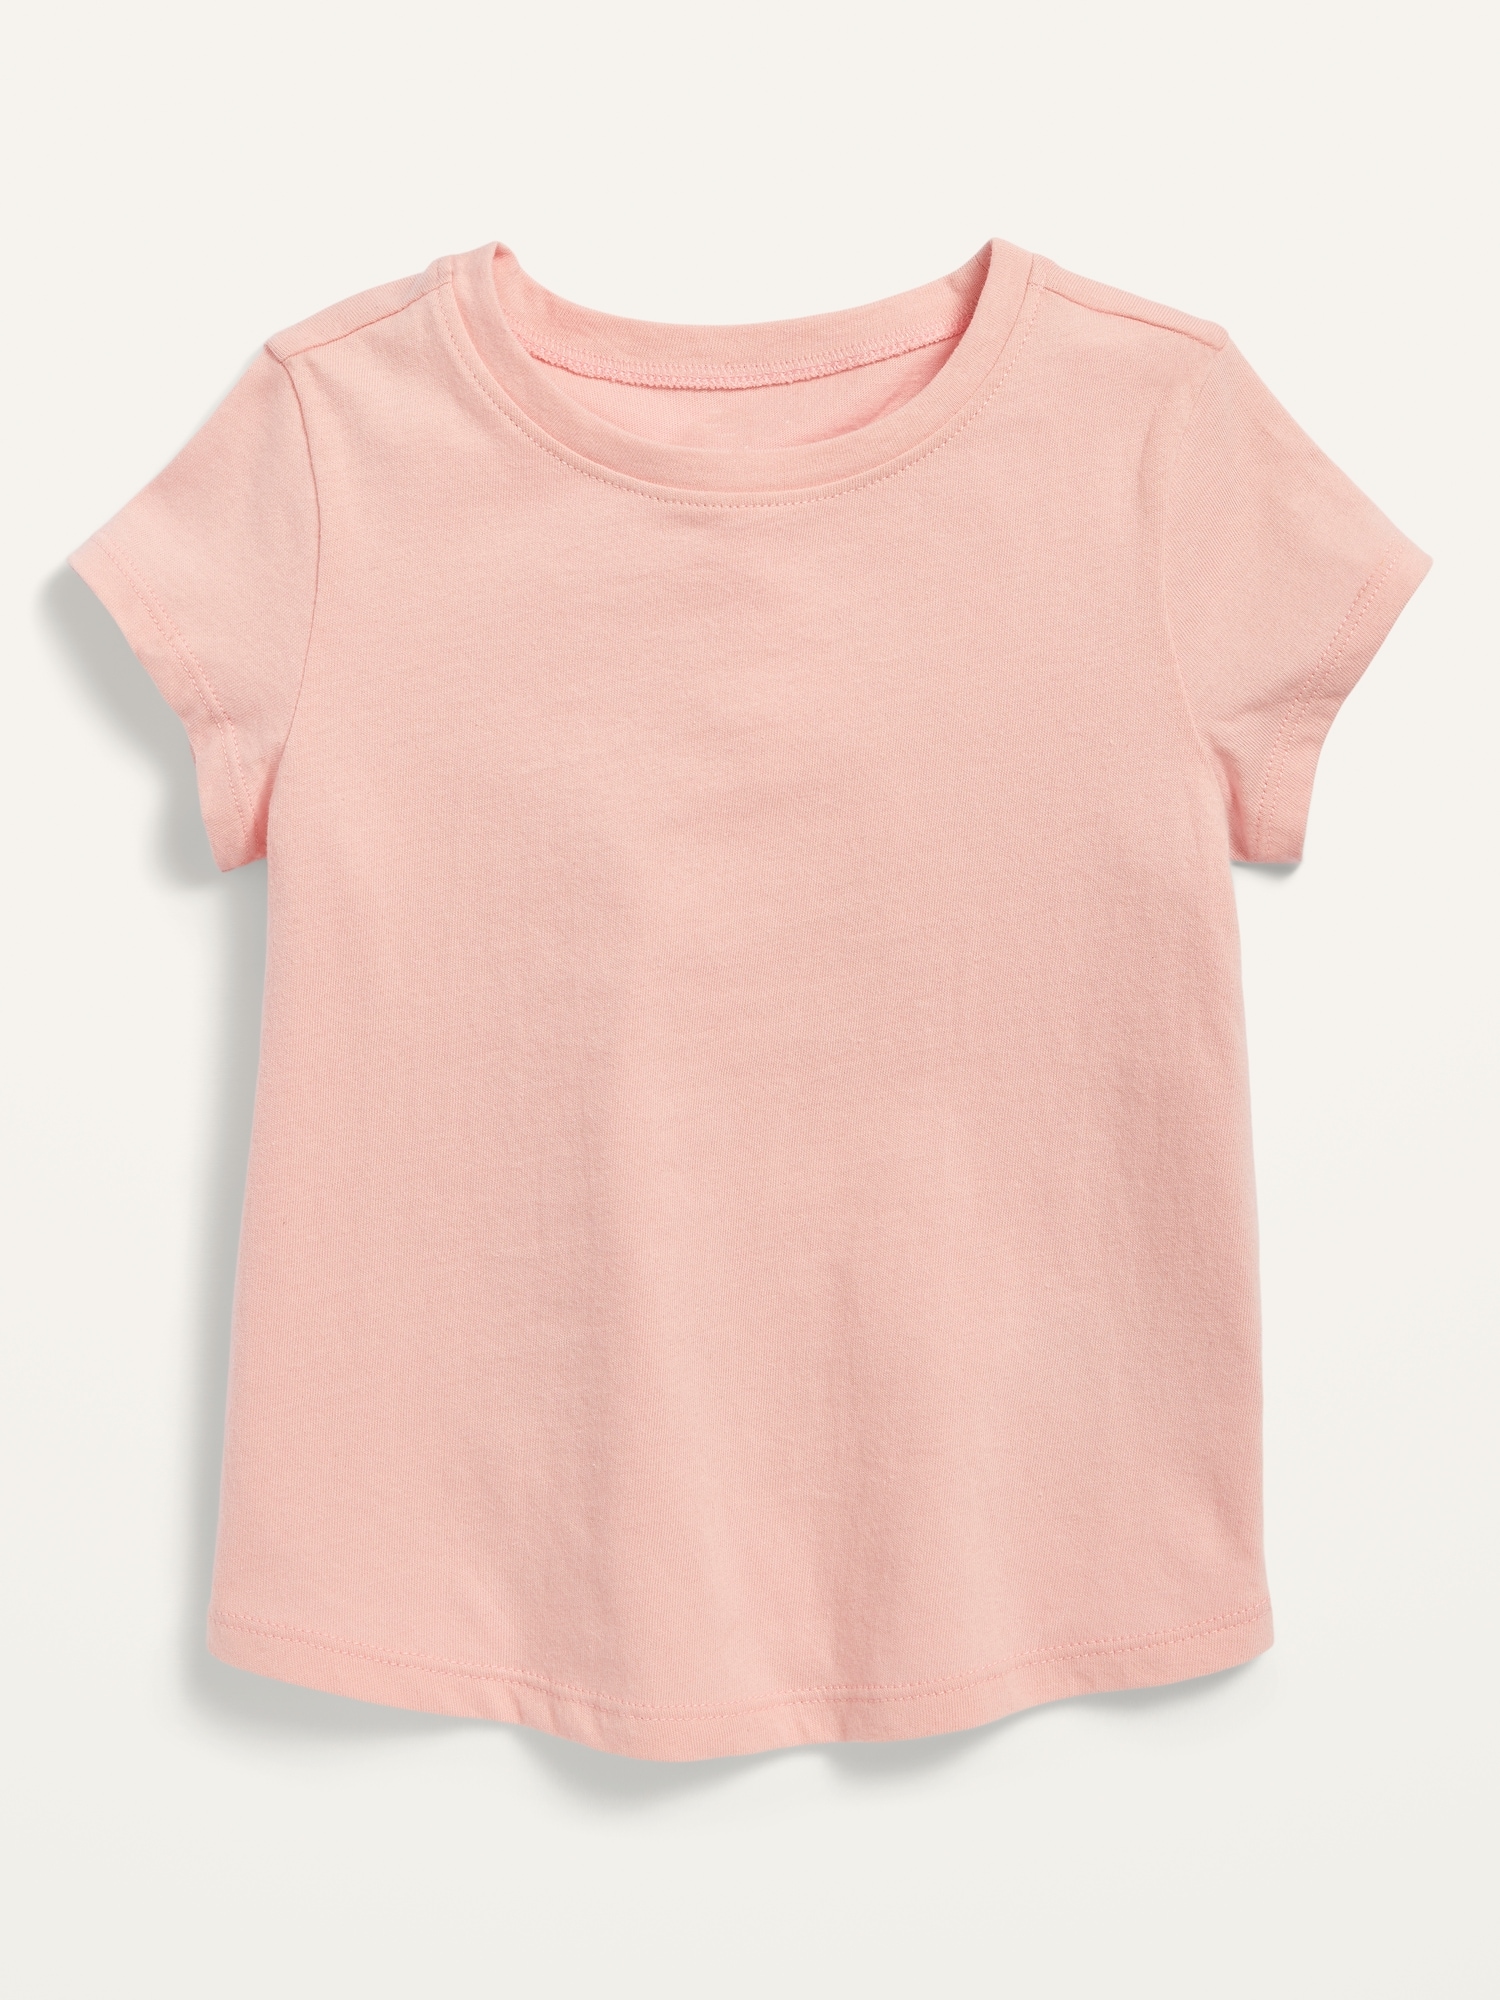 Old Navy Unisex Solid Short-Sleeve T-Shirt for Toddler pink. 1